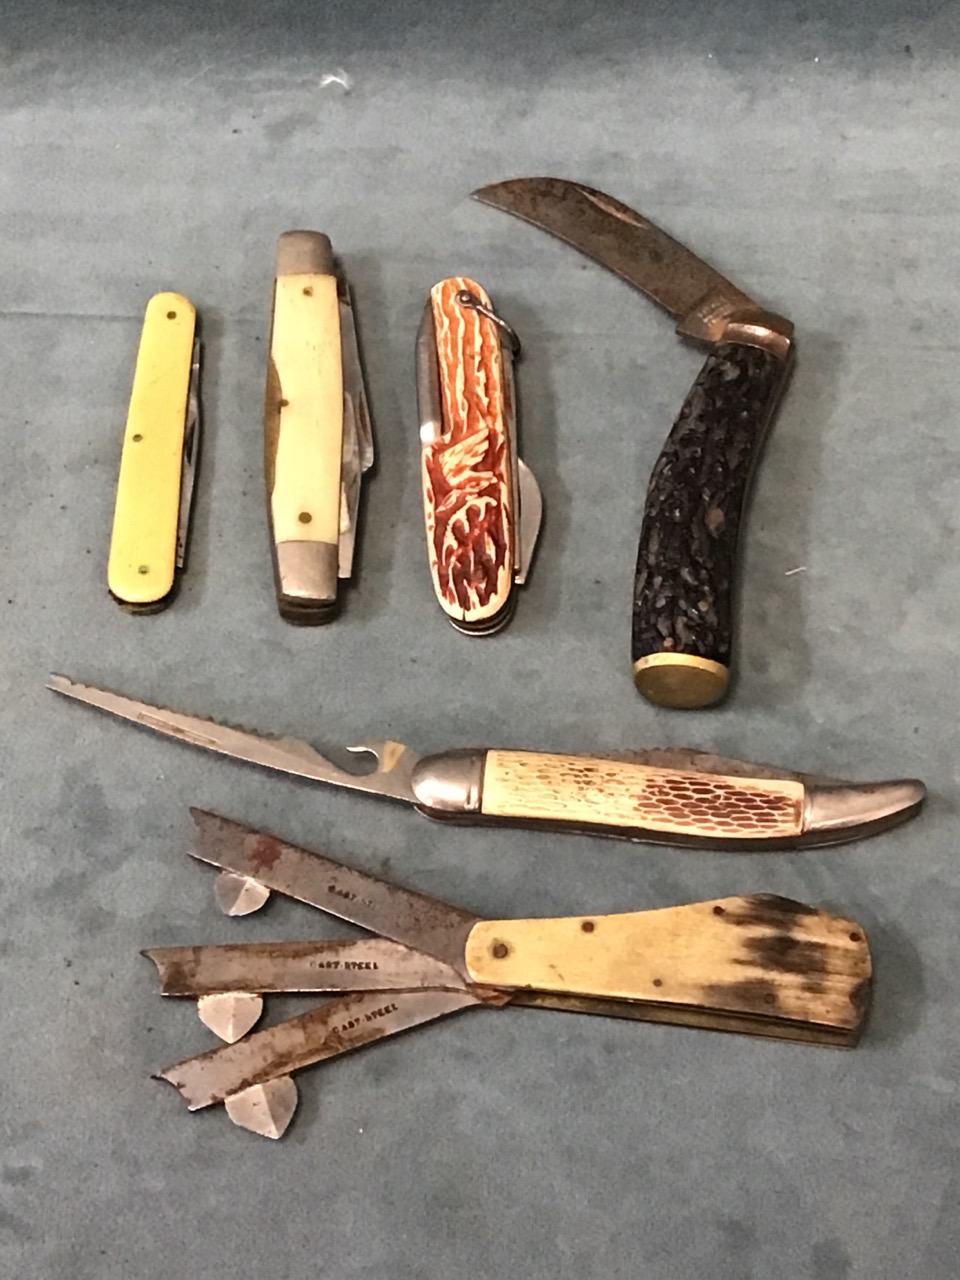 A collection of penknives - bone, antler horn, mother-of-pearl, wood and steel handled examples, a - Image 2 of 3